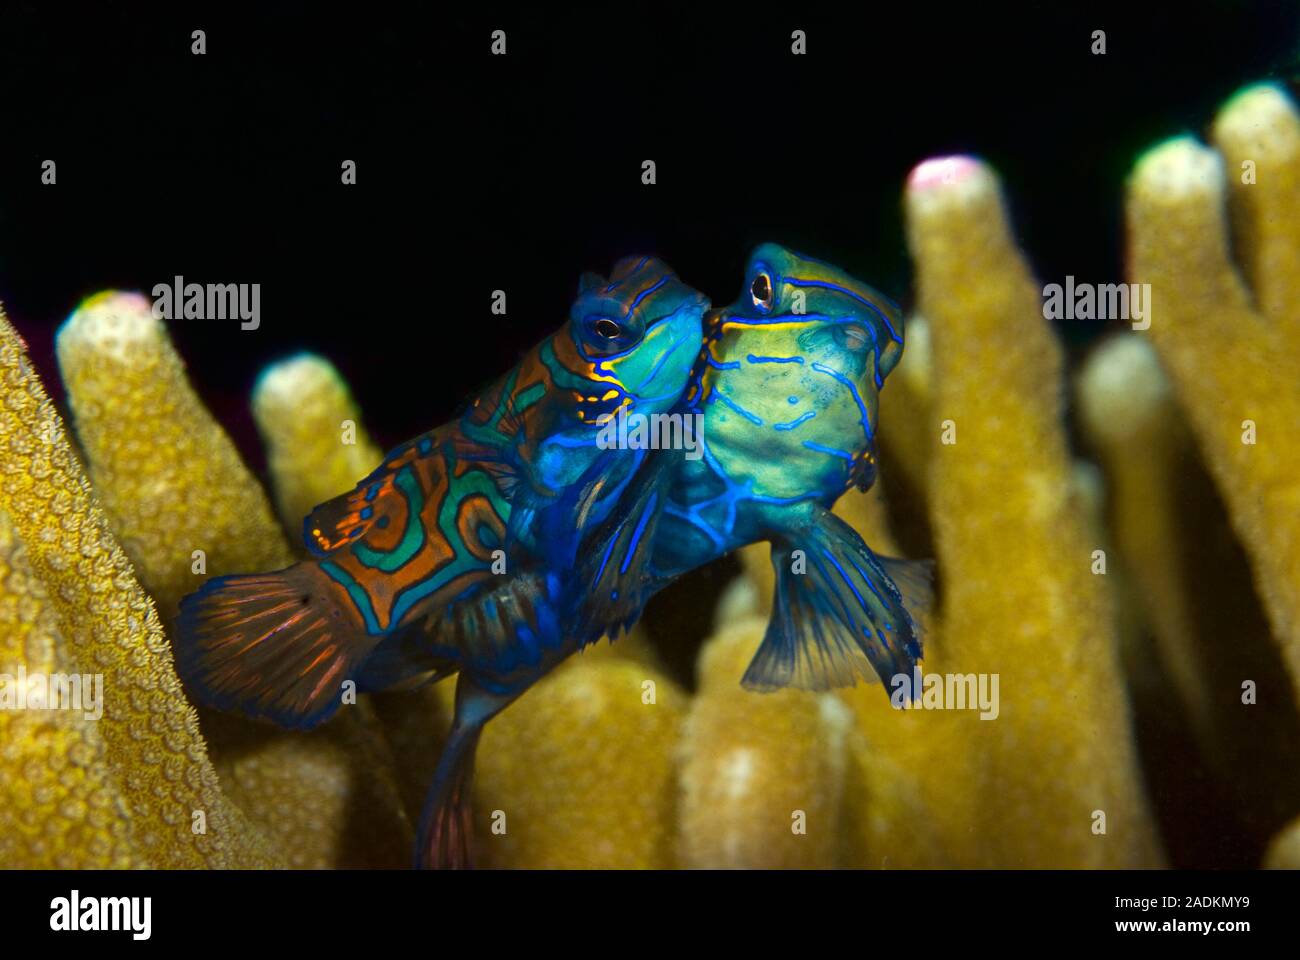 Mandarinfish usually remains hidden inside the coral during the day. Mating 'dances' start at sunset. Stock Photo